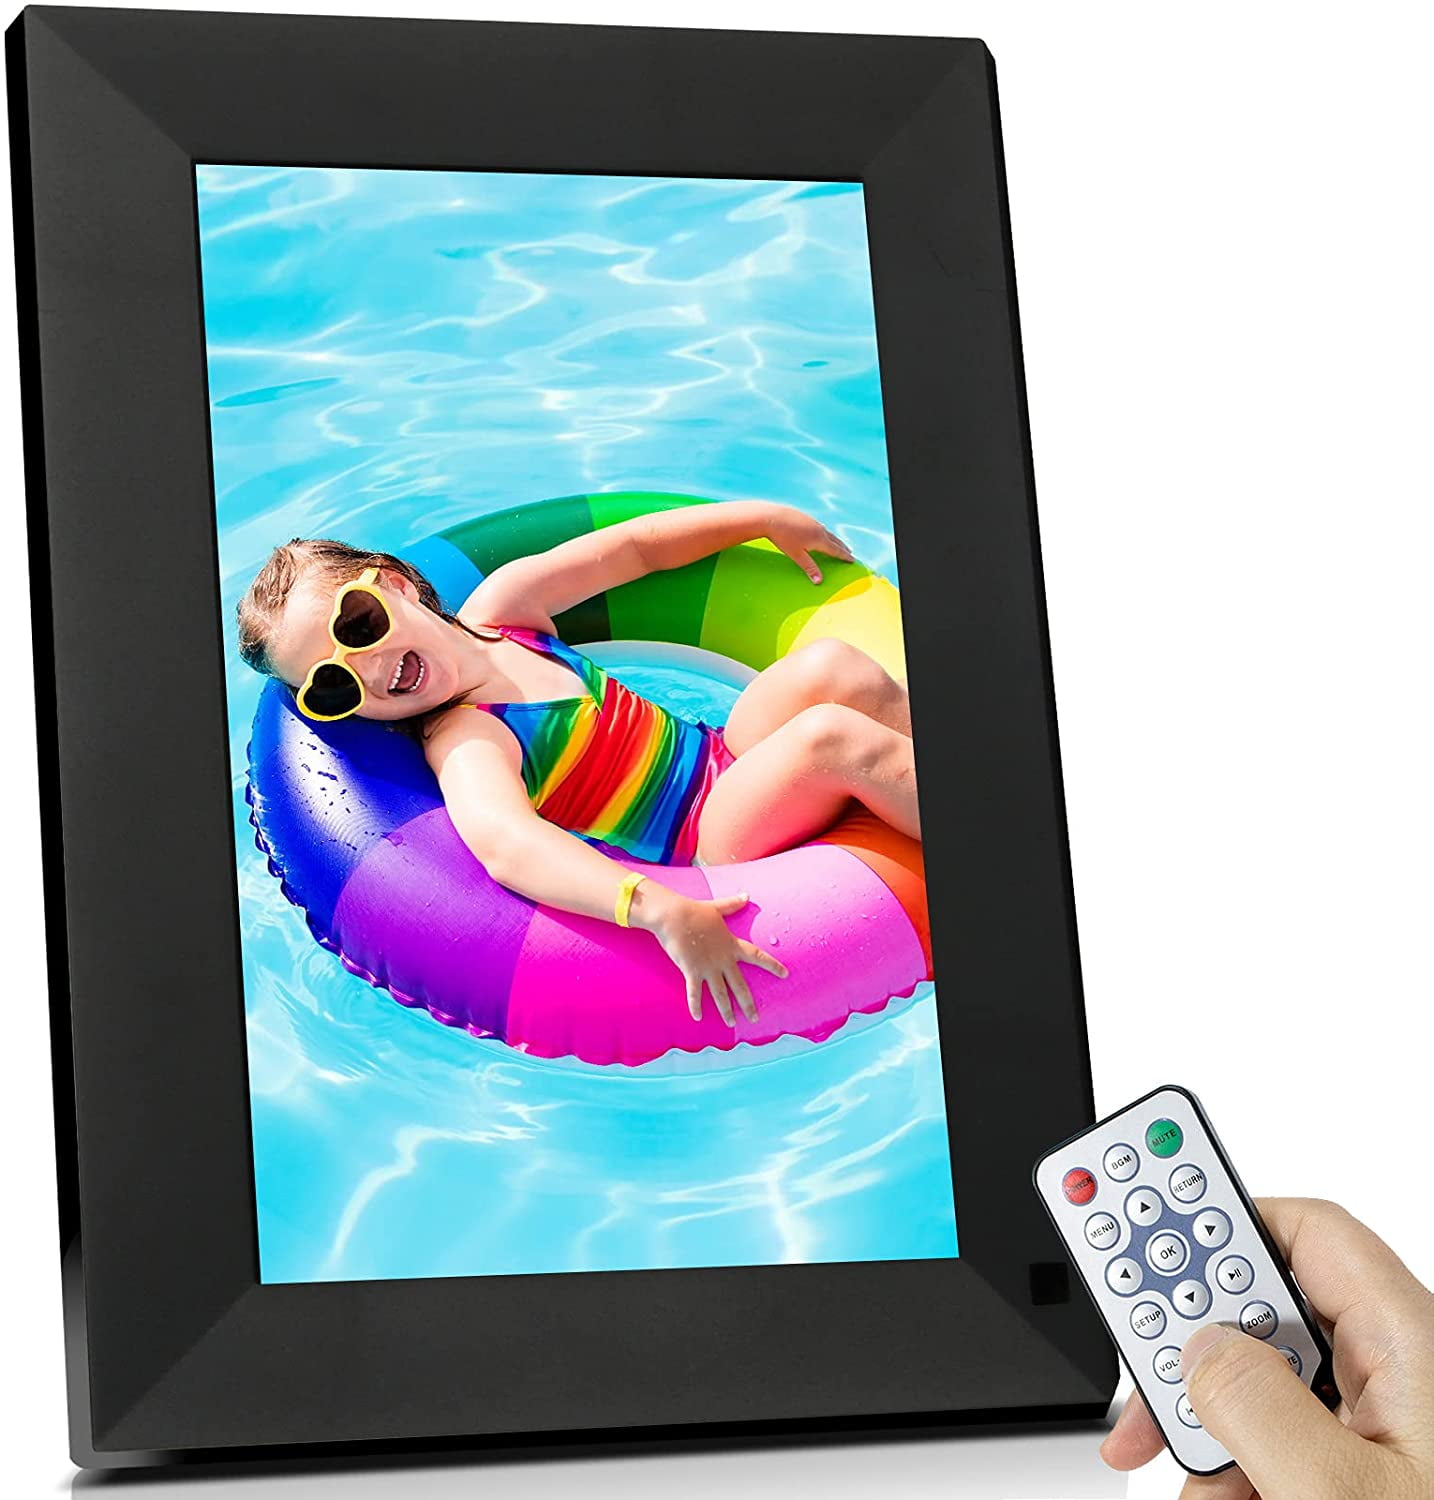 10 Inch Metal Digital Photo Picture Frames with 1024x768 High Resolution IPS Screen & Remote Control Support SD/MMC/MS Card/USB Port Electronic Picture Photo Frame